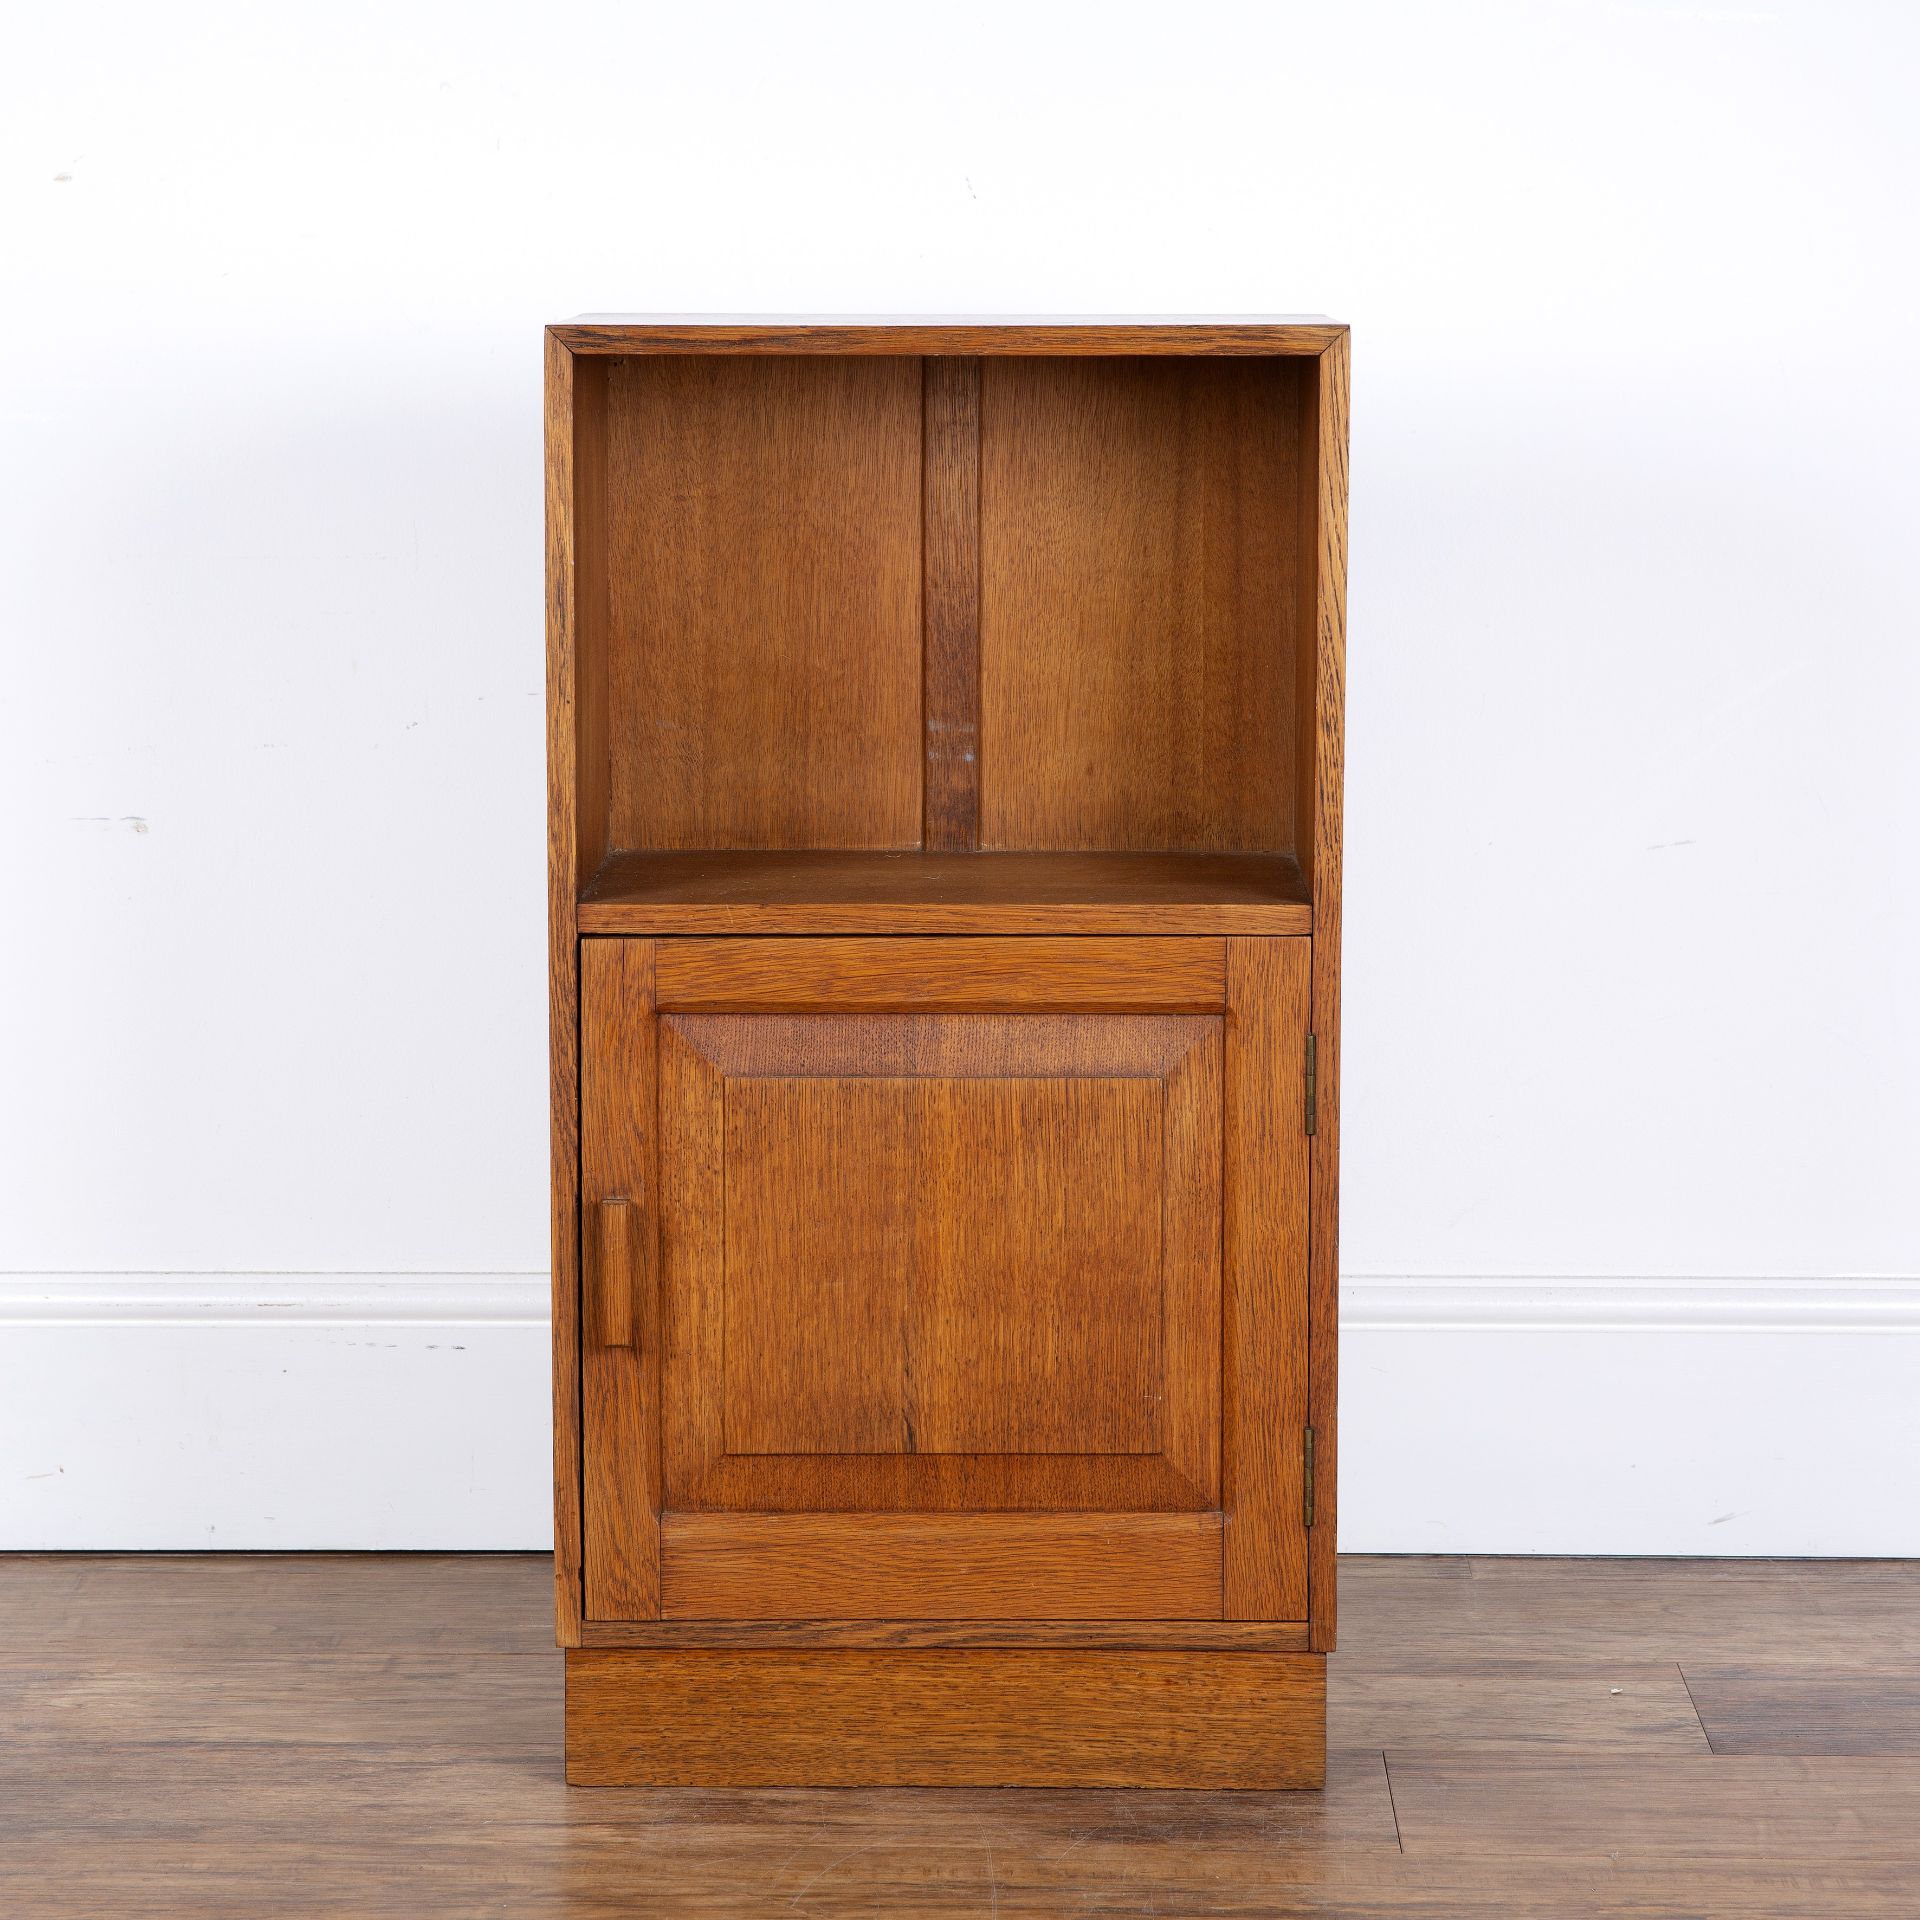 Attributed to Heals oak, small cupboard or bedside table, with open shelf above a fielded panel